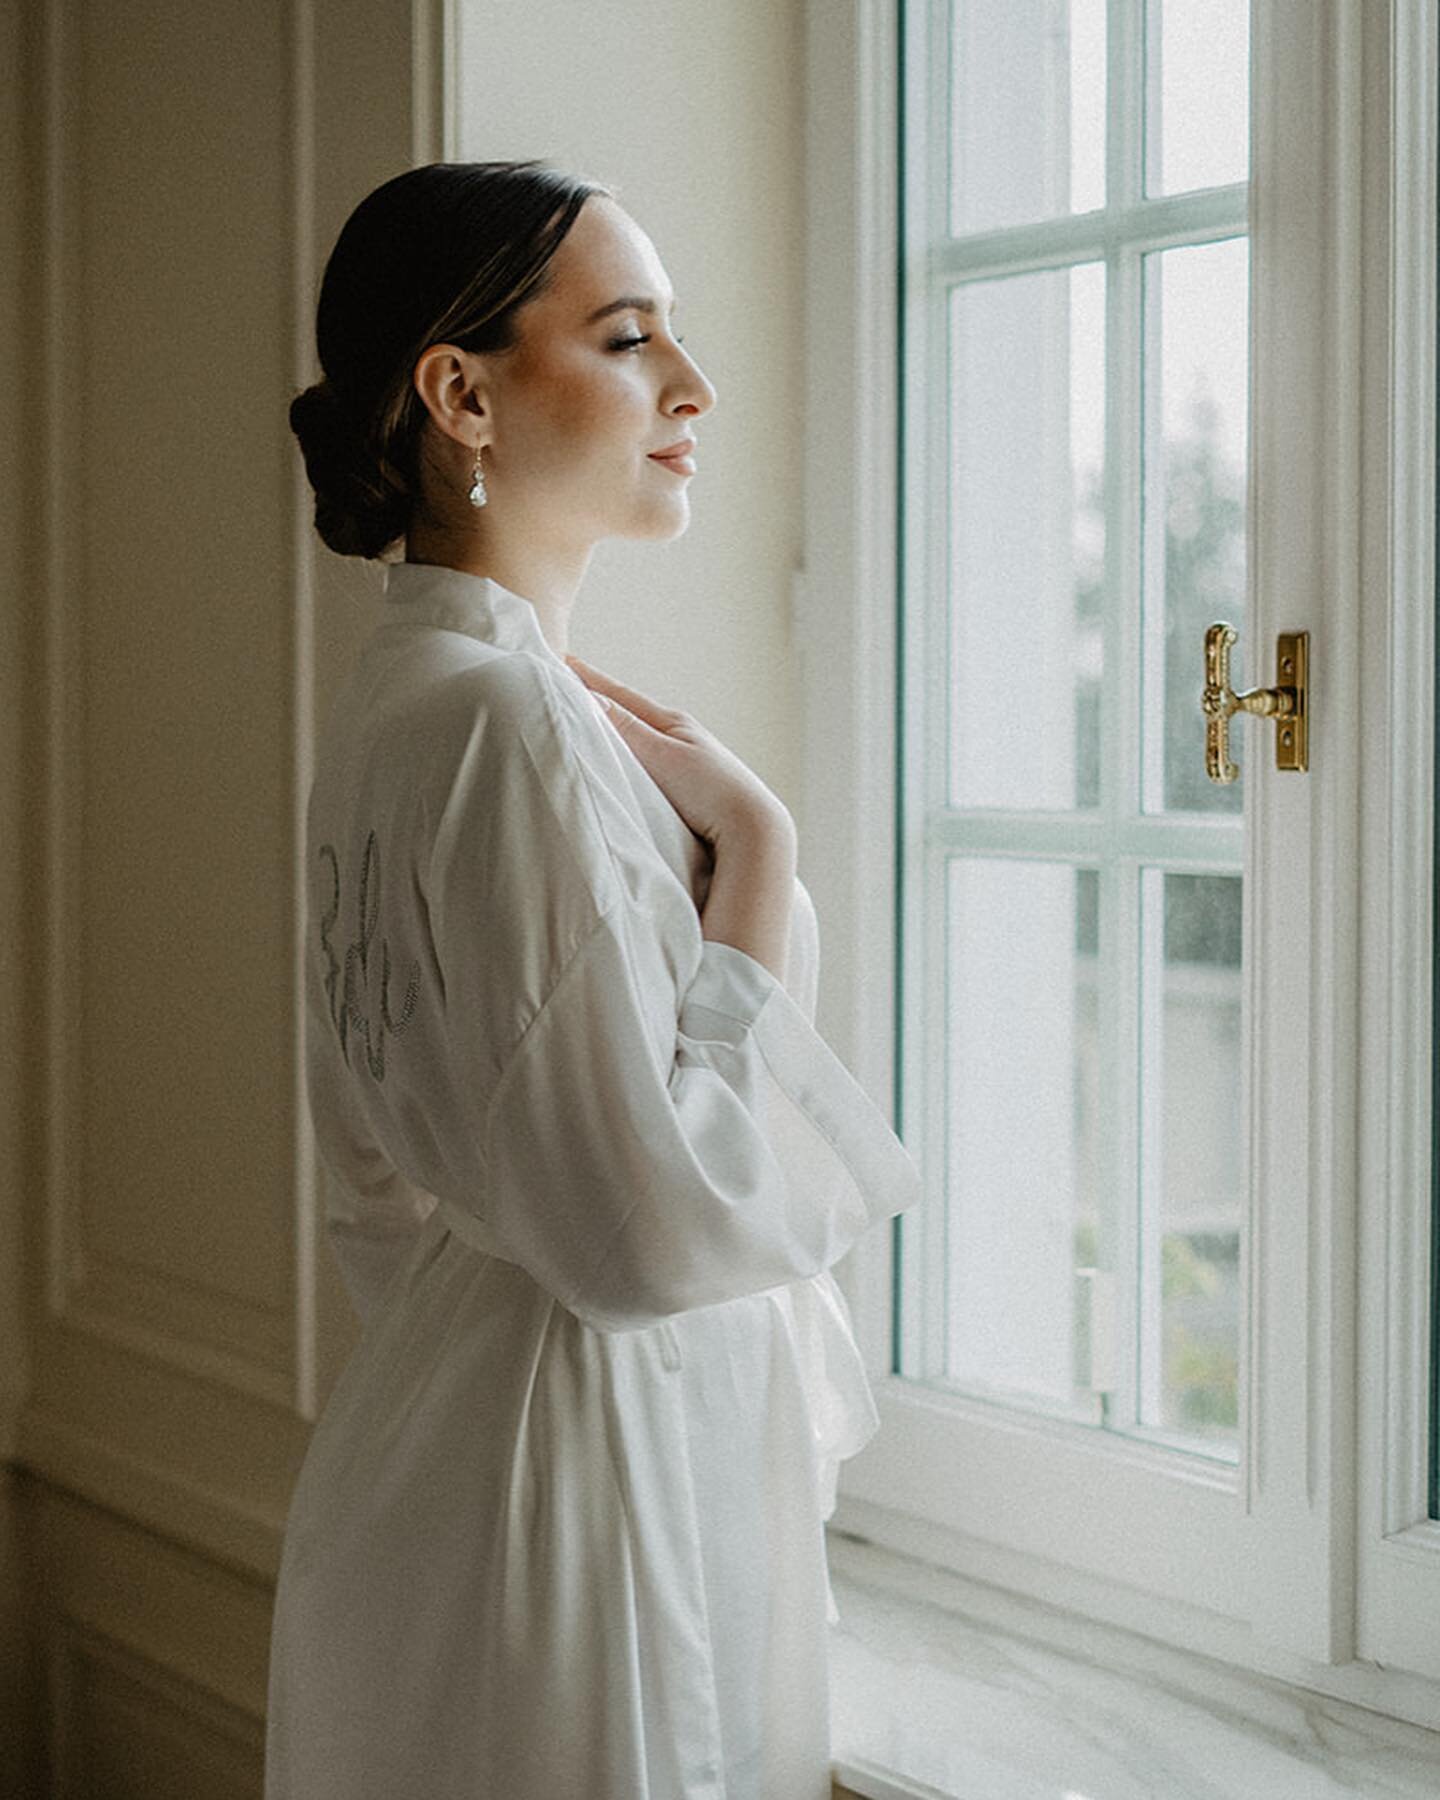 Waiting is hard sometimes, but waiting for another, can be an exciting anticipation. 🌹

Getting ready ! 🤌🏼 ✨

Konzept &amp; Planung: @babaholzeventdekoration_bygogi &amp; @adriana.schindler.photography
Location: @villa_heckenfels 
Dekoration: @bab